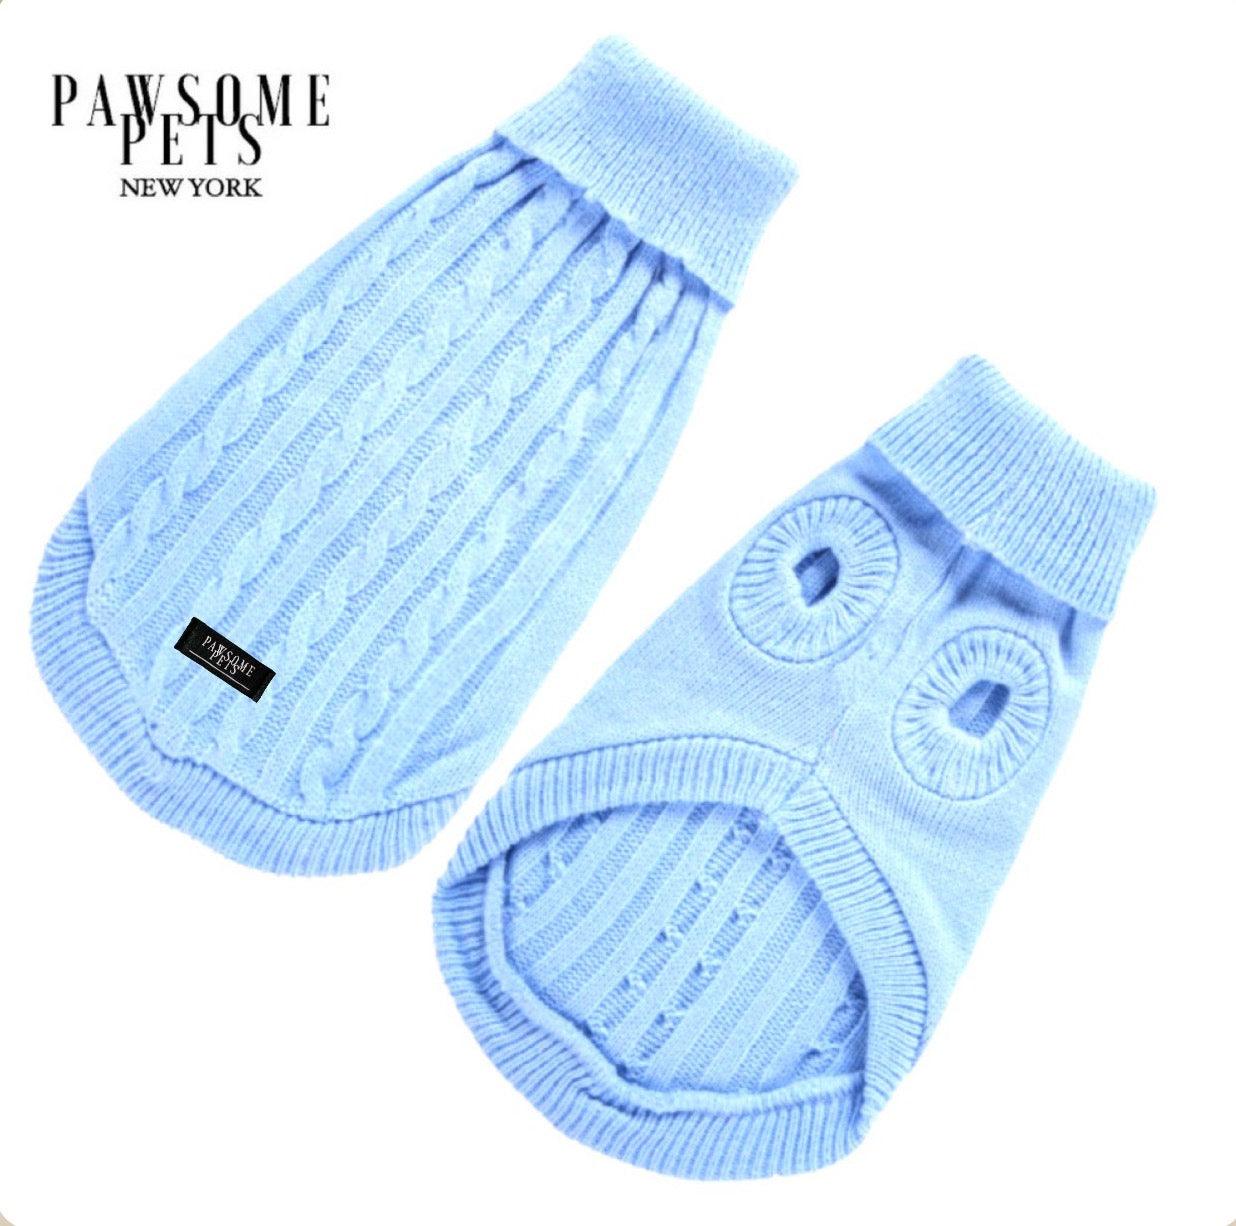 DOG AND CAT CABLE KNIT SWEATER - LIGHT BLUE - Pawsomepetsnewyork